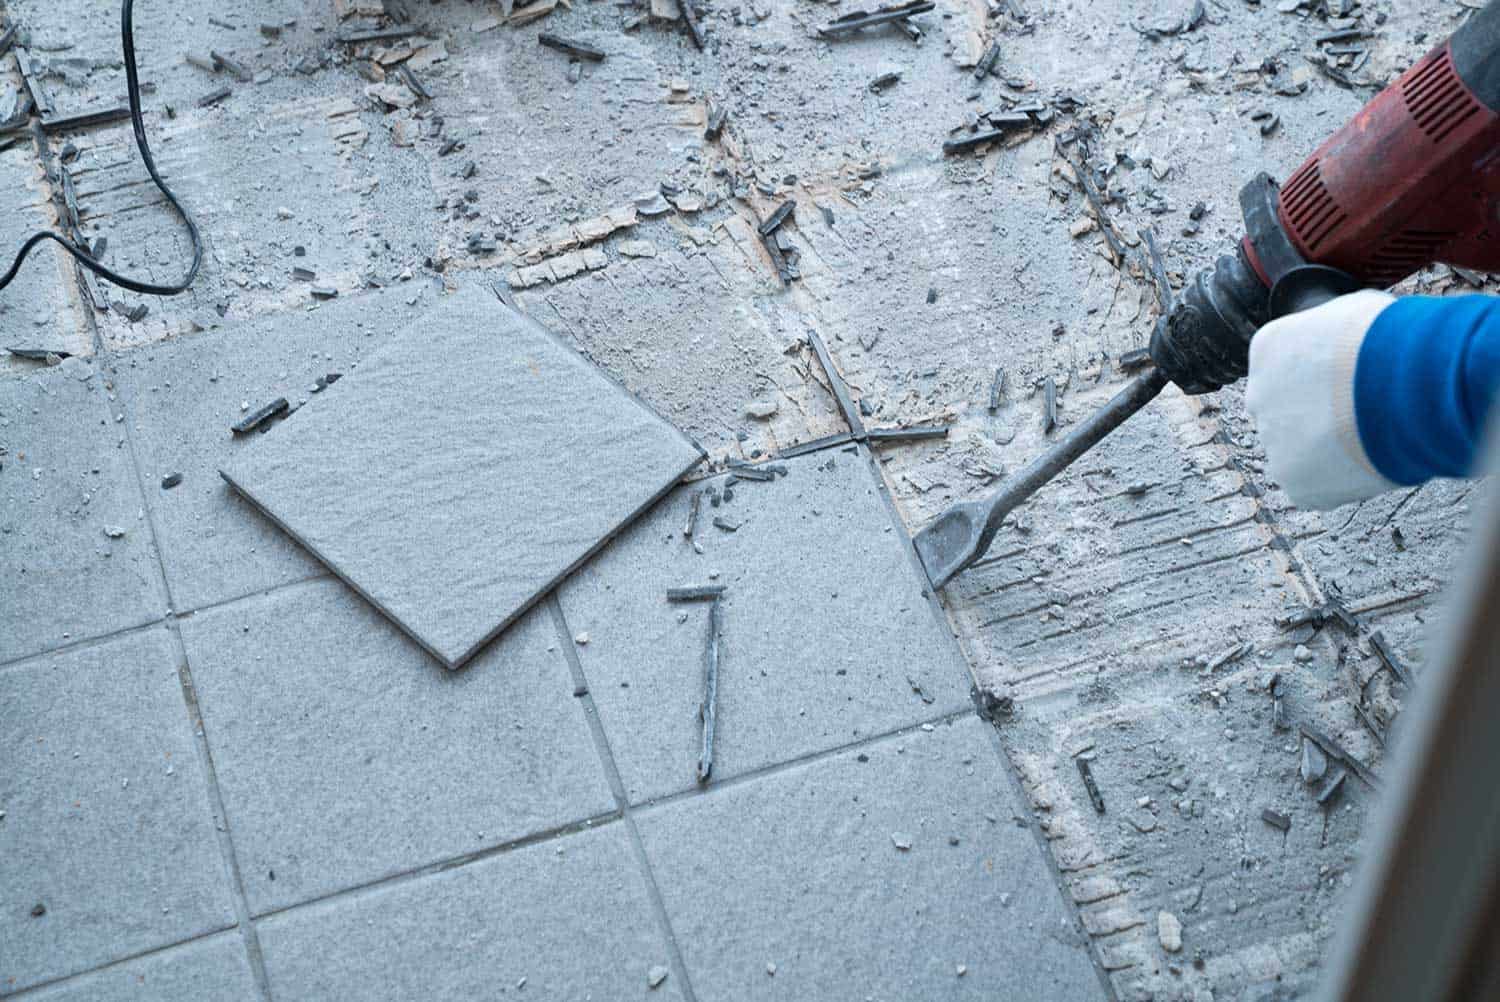 Construction worker using a handheld demolition hammer and wall breaker to chip away and remove old floor tiles during renovation work